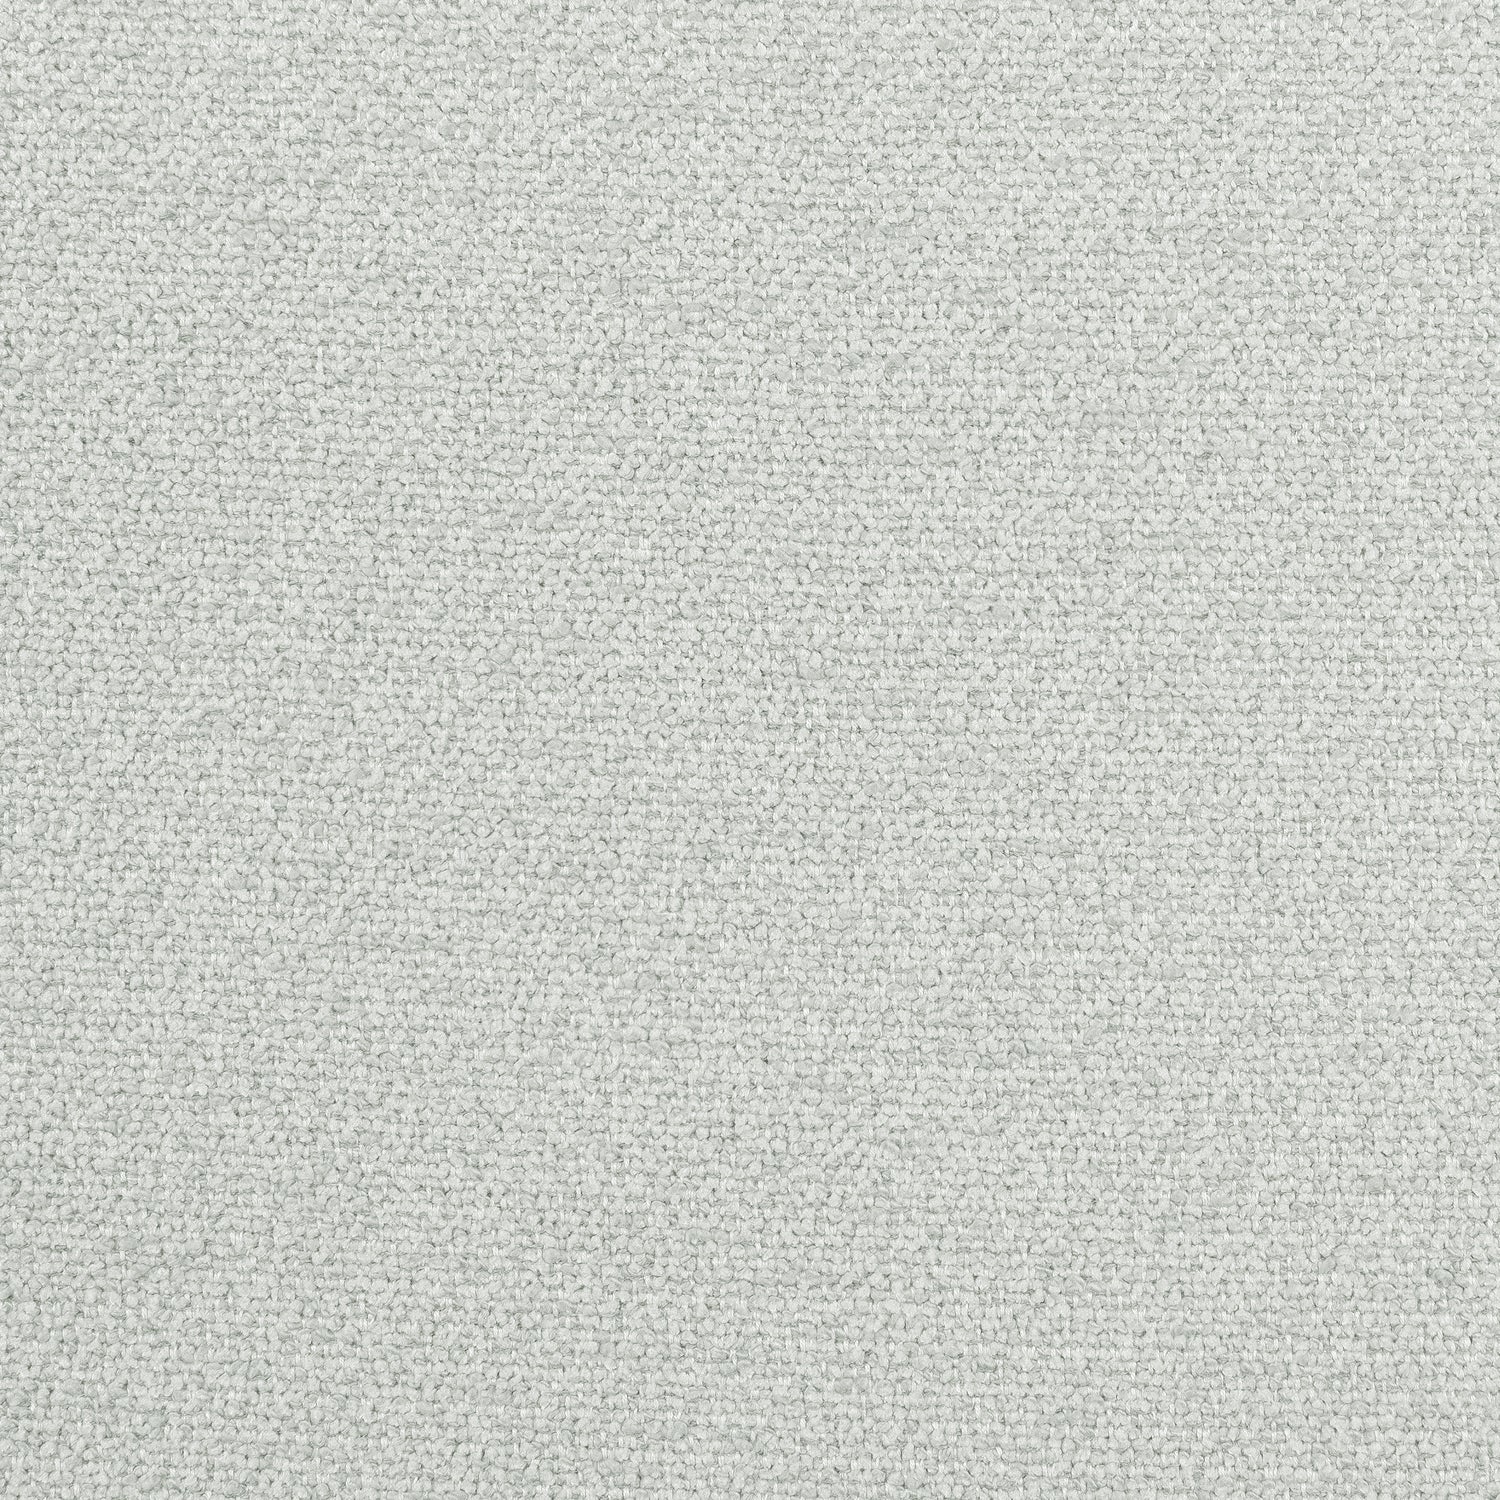 Dolcetto fabric in platinum color - pattern number W8138 - by Thibaut in the Sereno collection